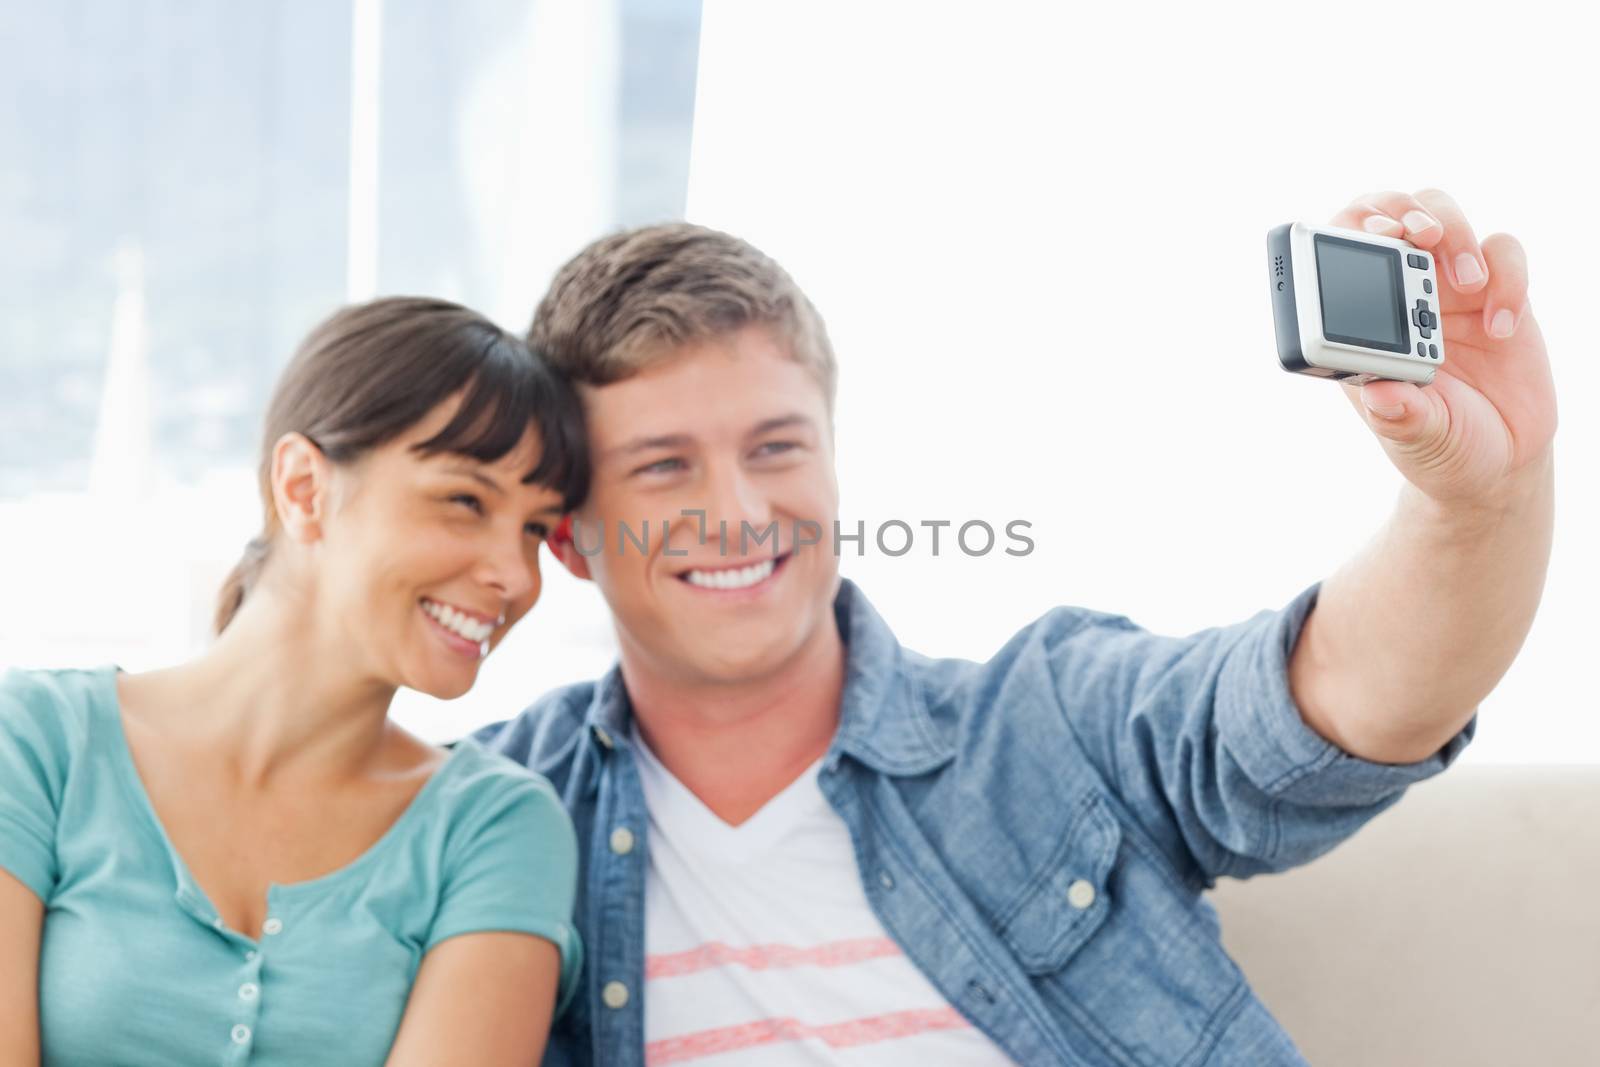 A smiling couple pose for a romantic photo together by Wavebreakmedia